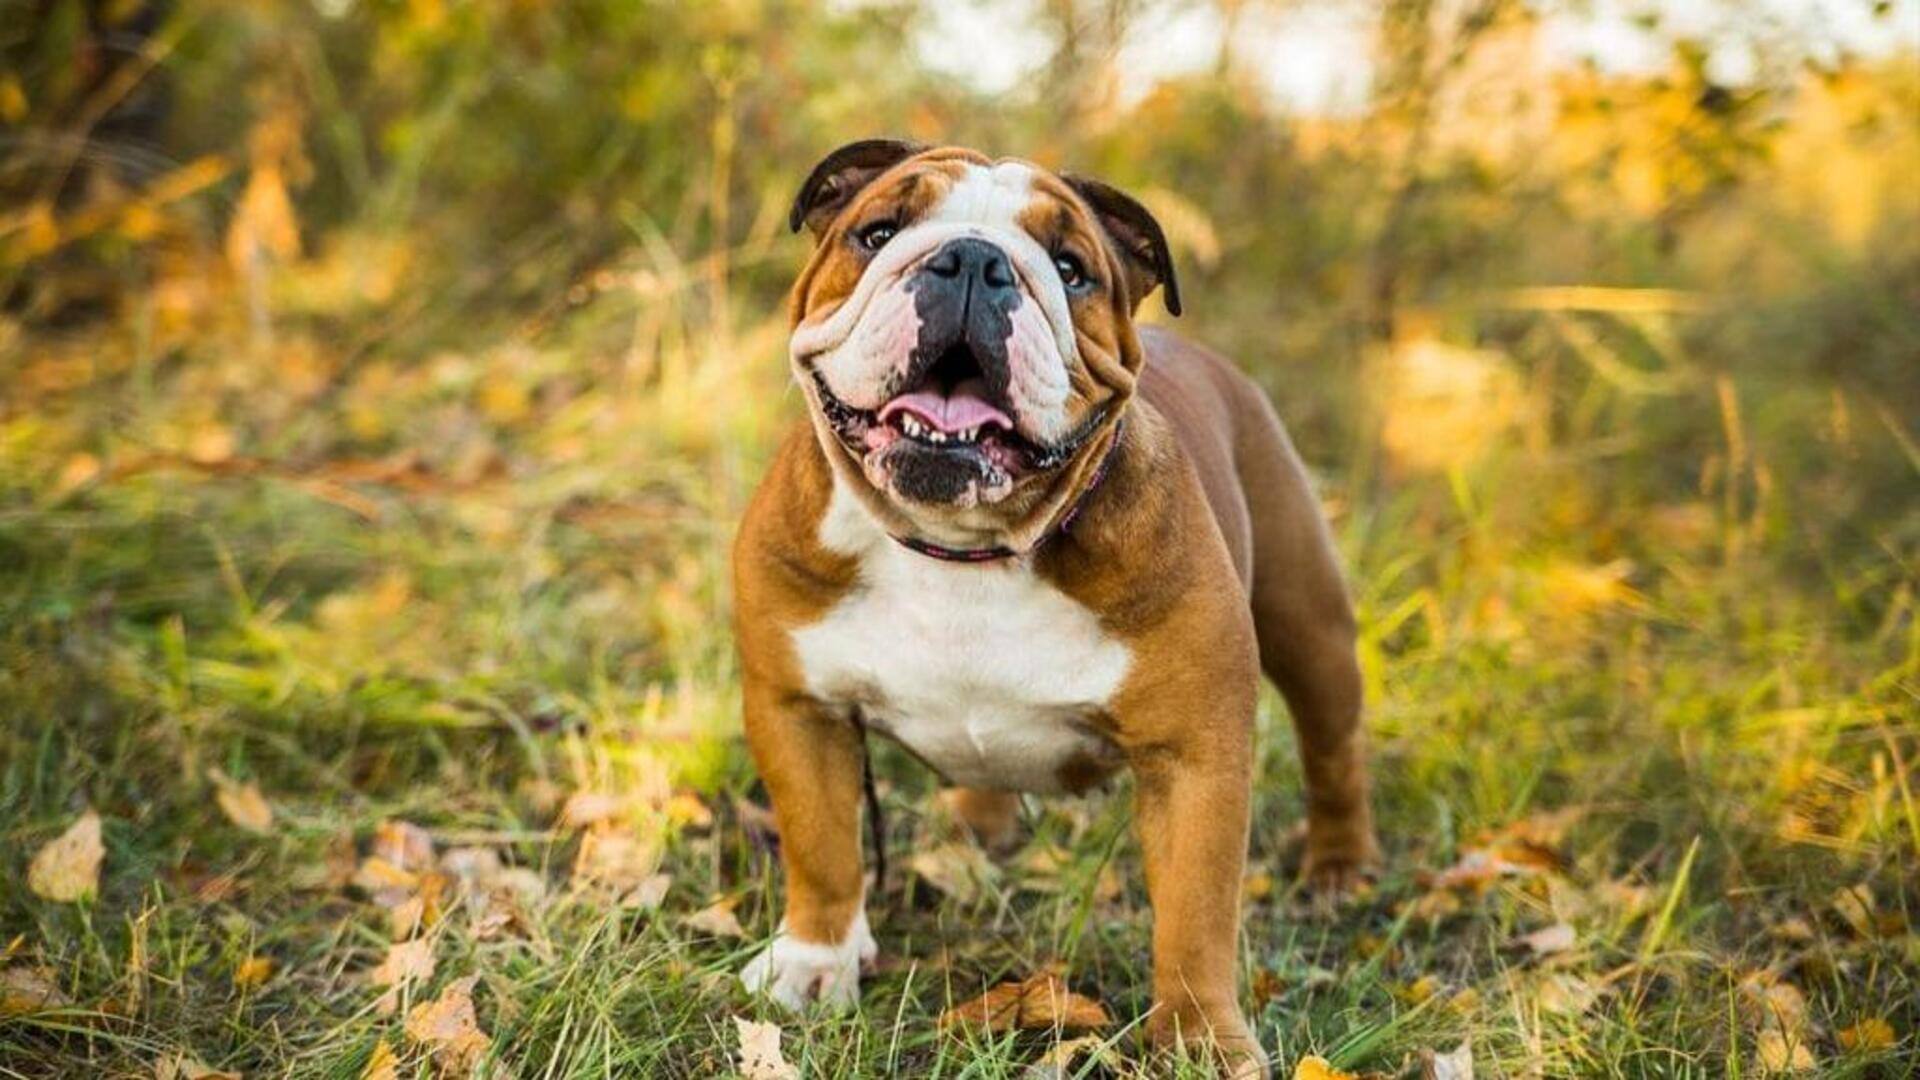 A Bulldog's health essentials: Activity plan, food, and weight management